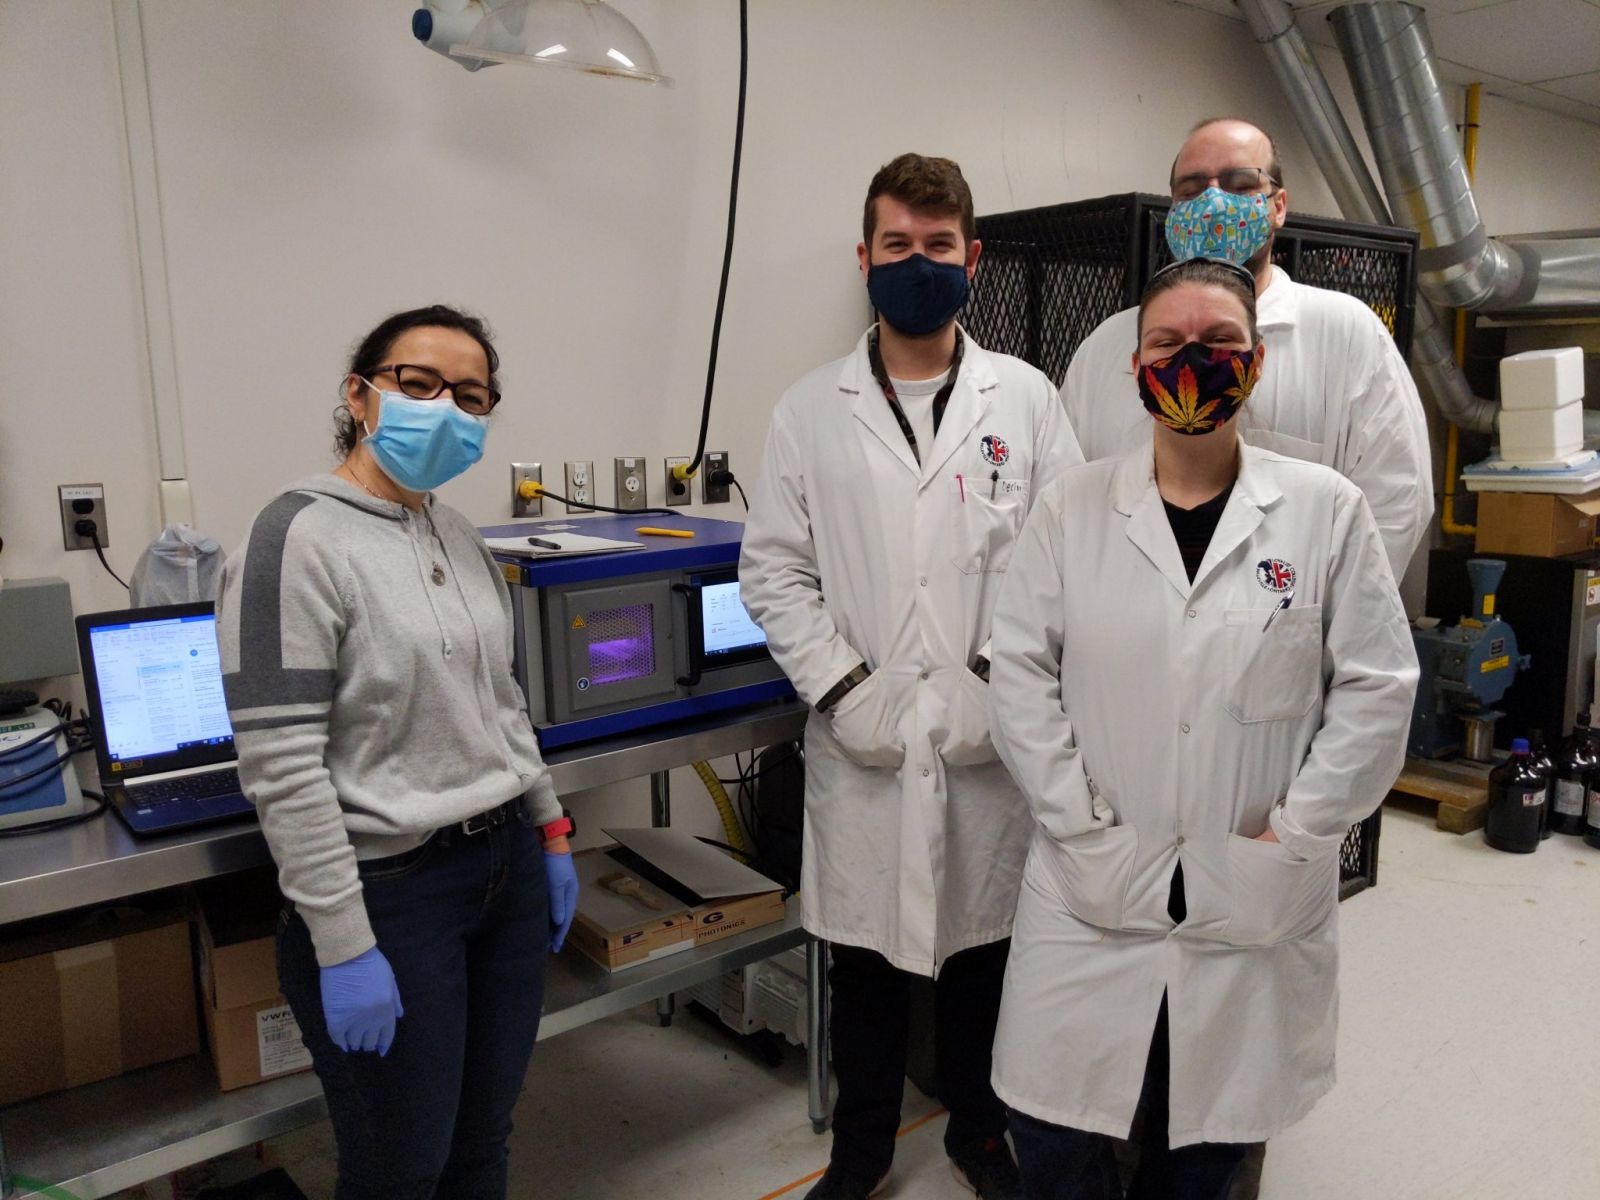 Cold Plasma Group and the ARC team at the Loyalist College in Belleville, ON